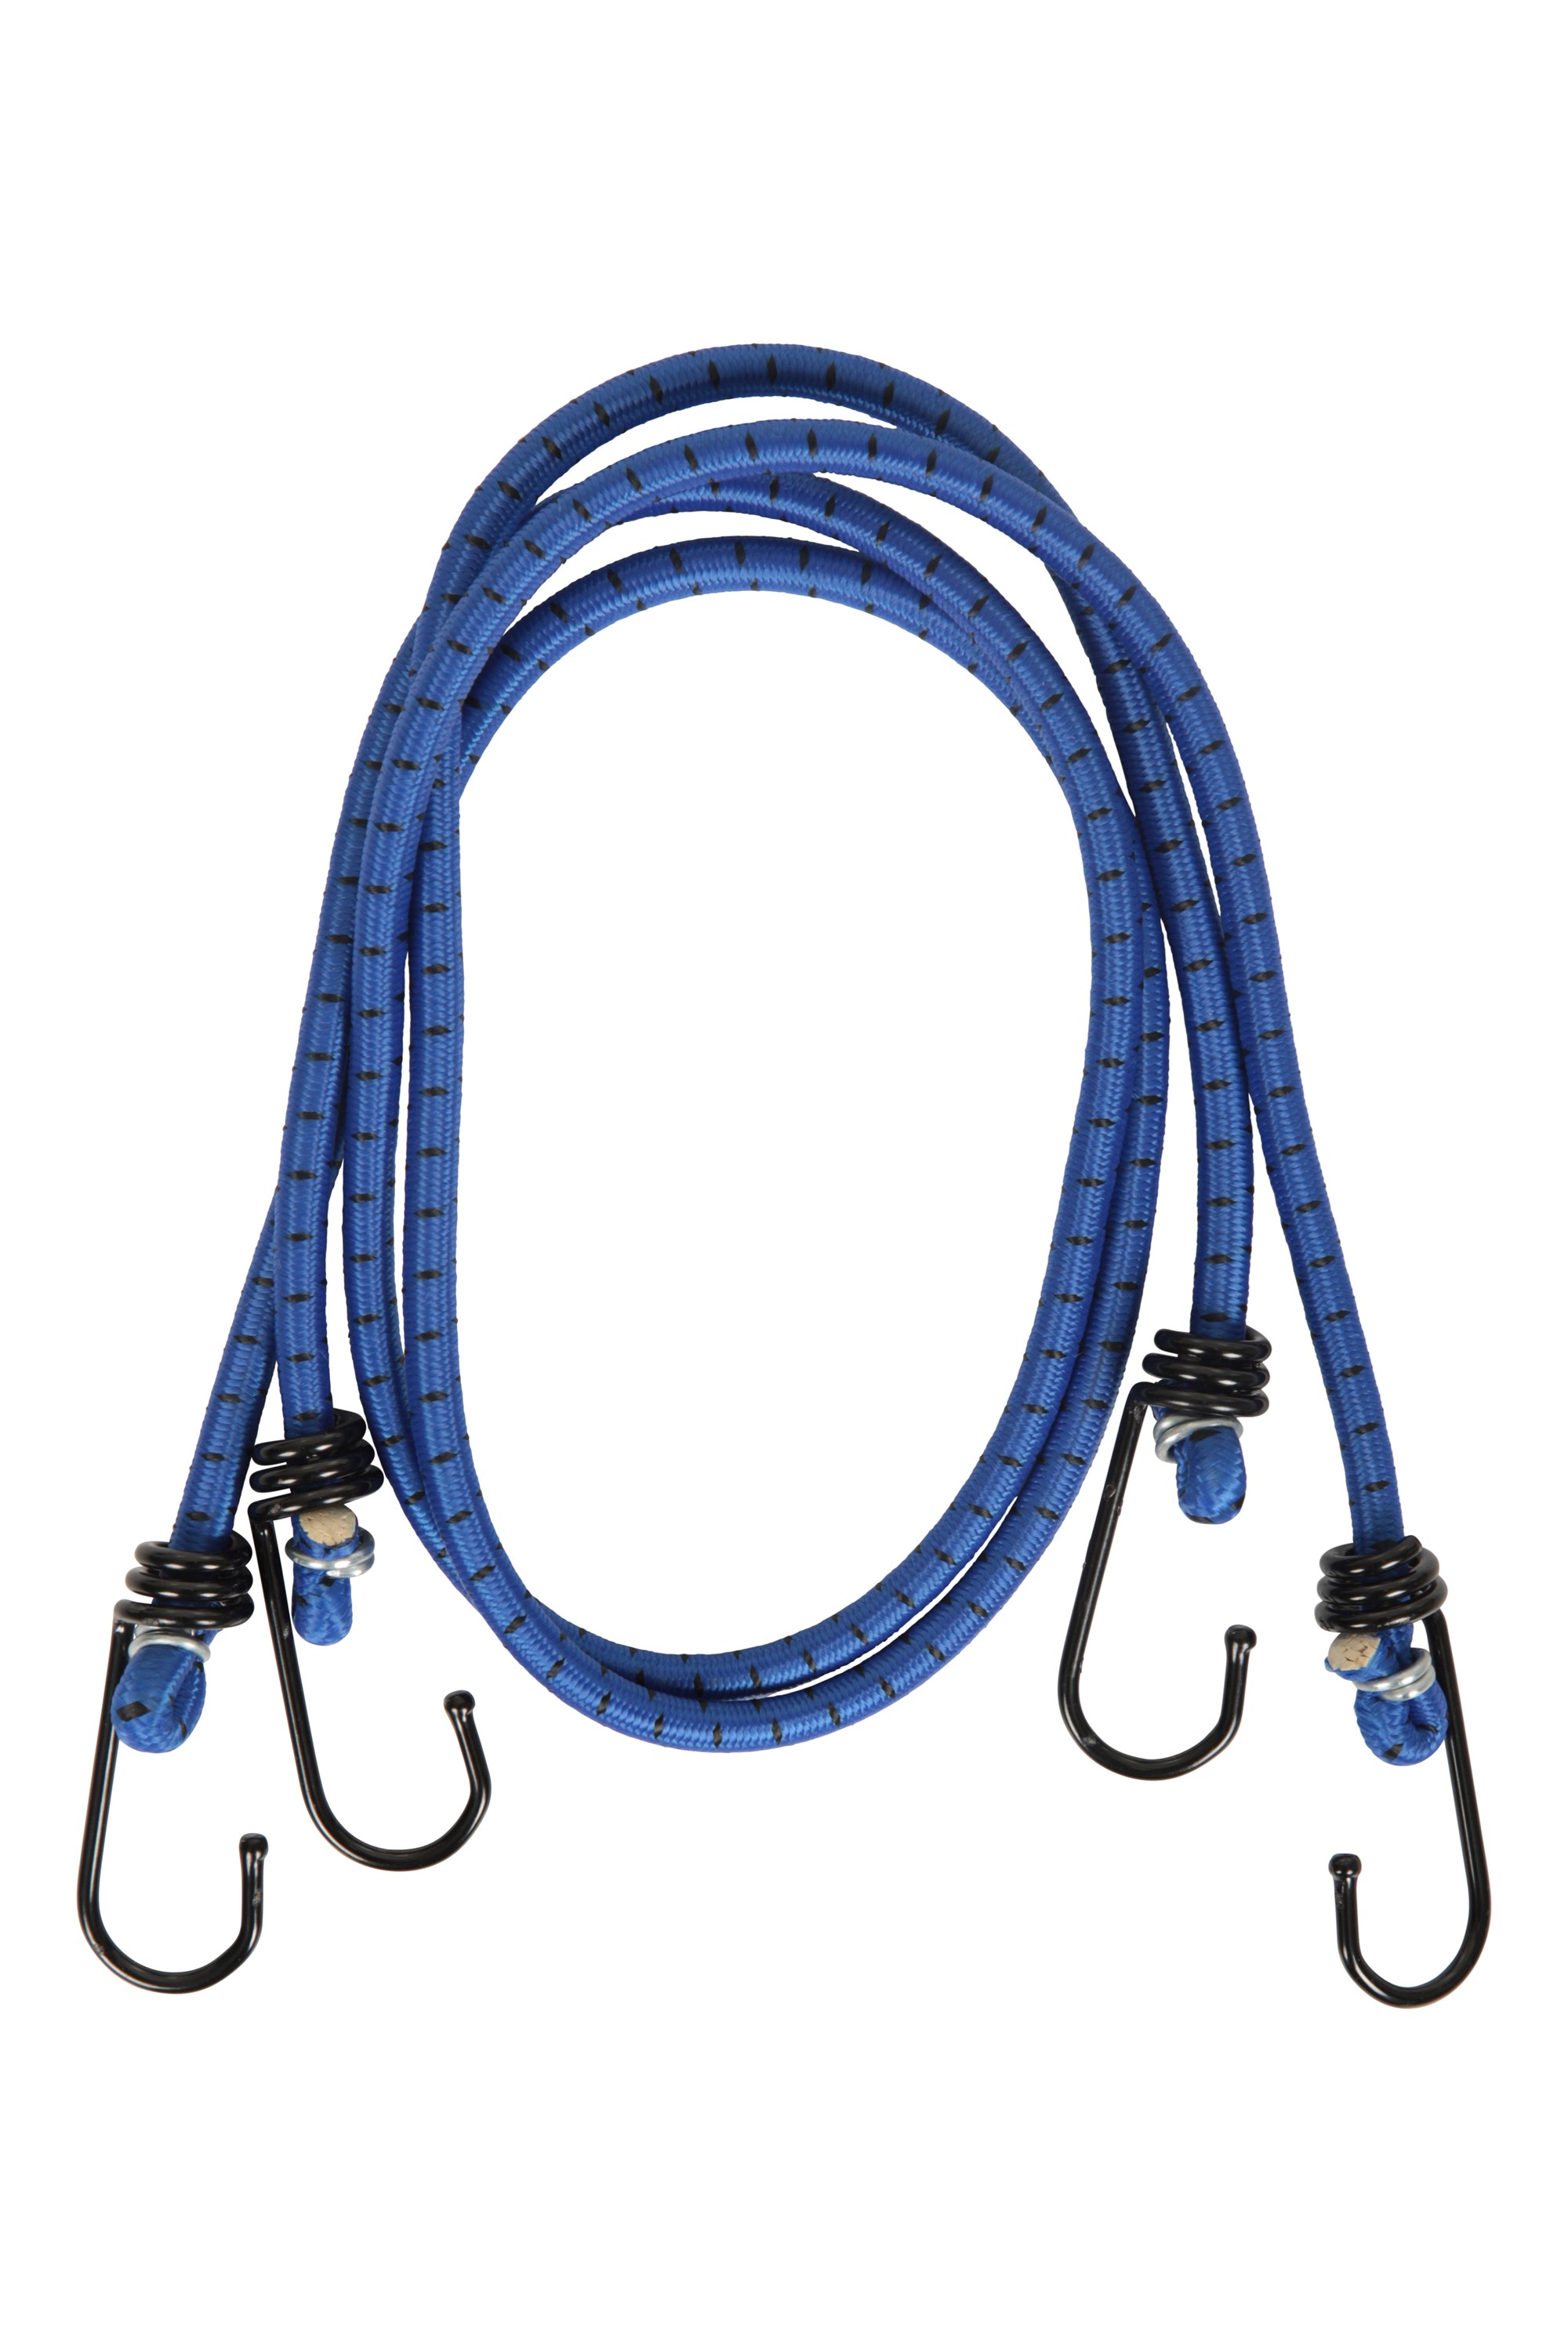 Bungee Cords - 2 Pack - Blue